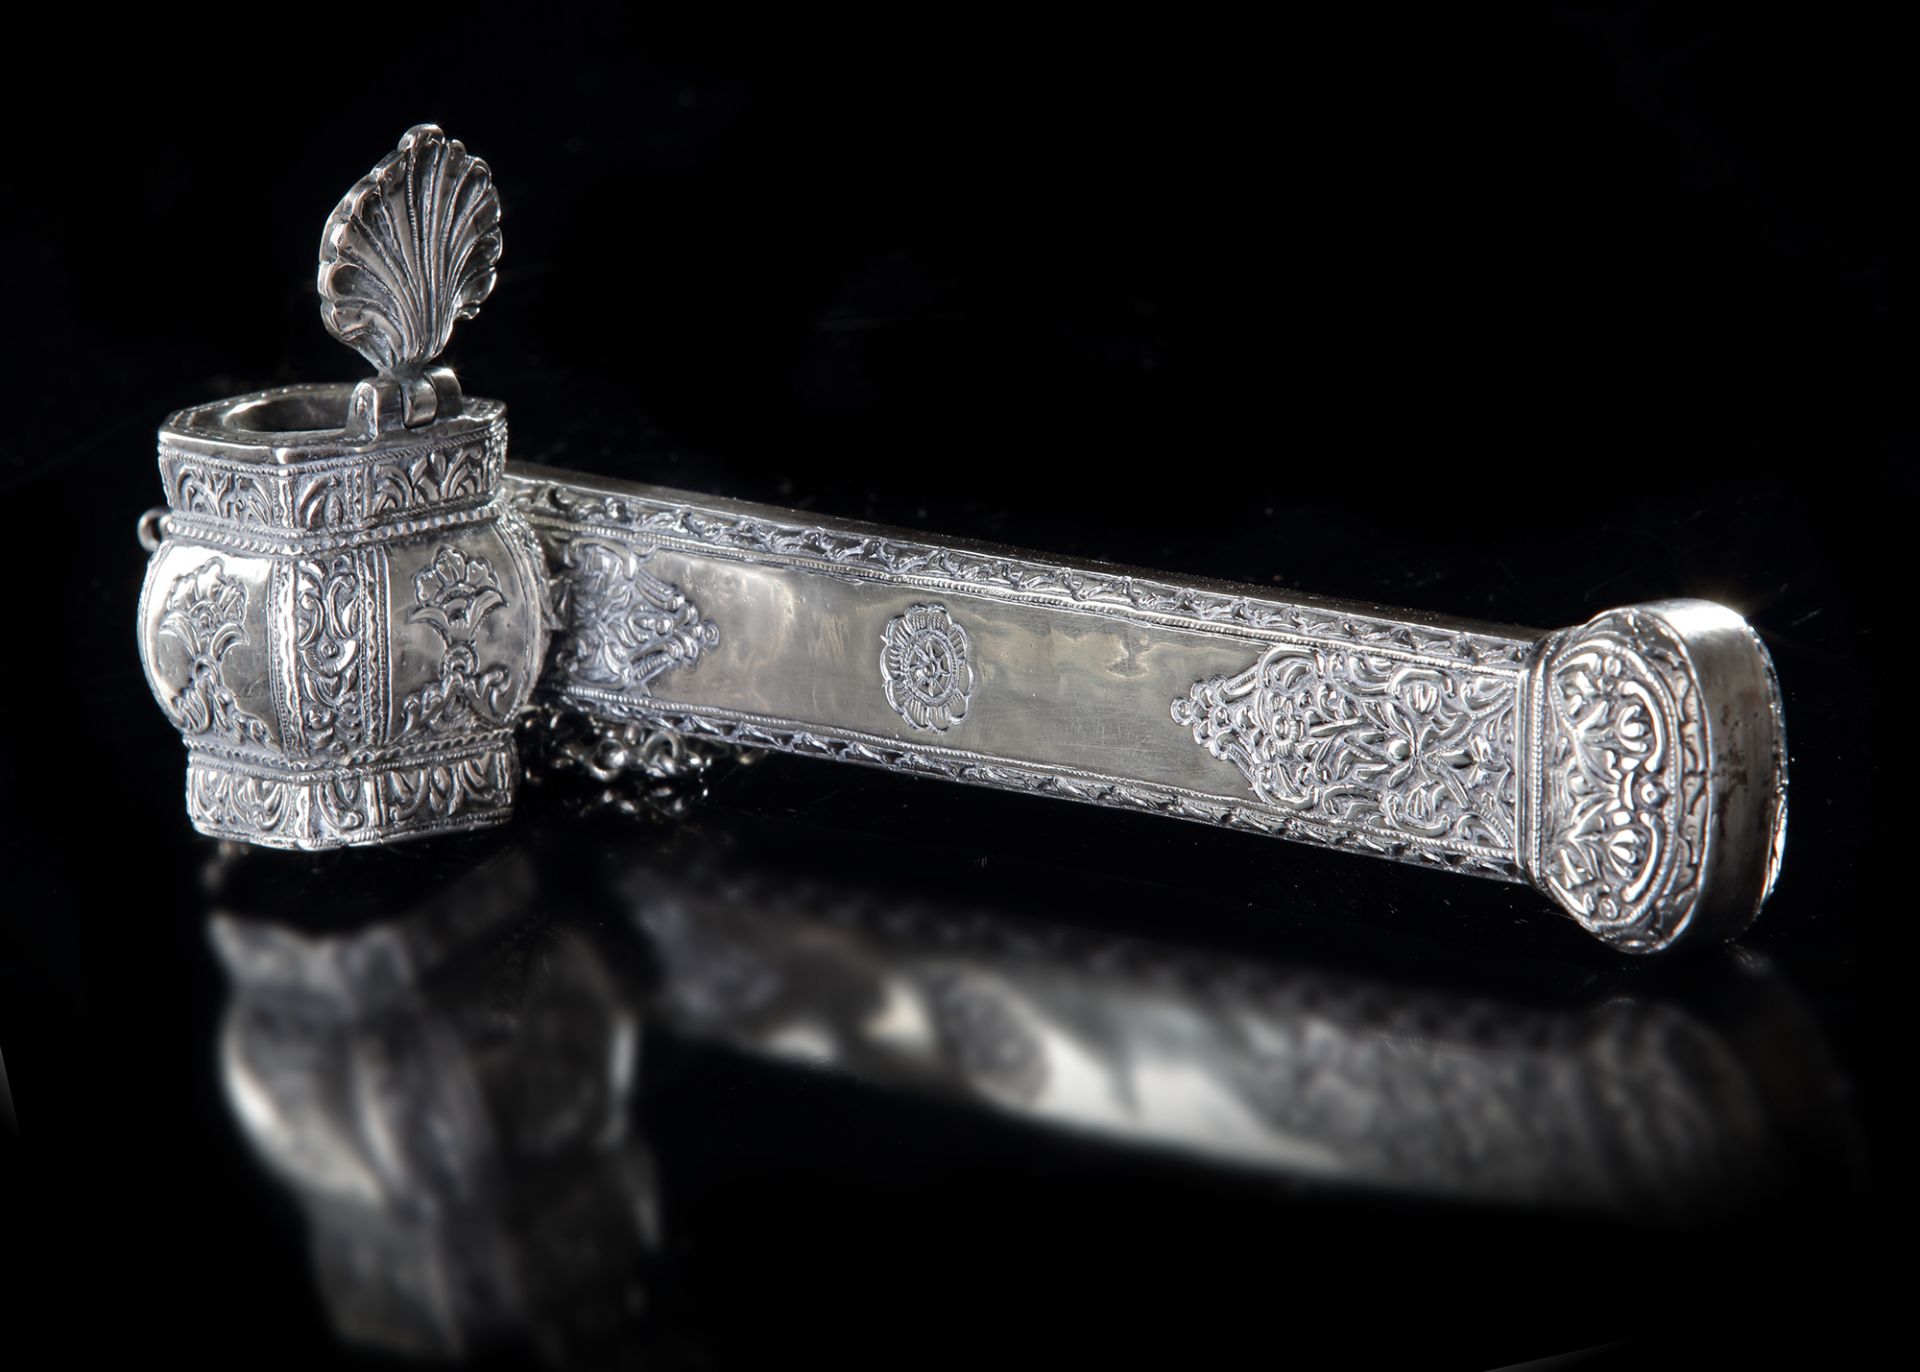 AN OTTOMAN SILVER PENCASE (DIVIT), 18TH-EARLY 19TH CENTURY - Image 3 of 3